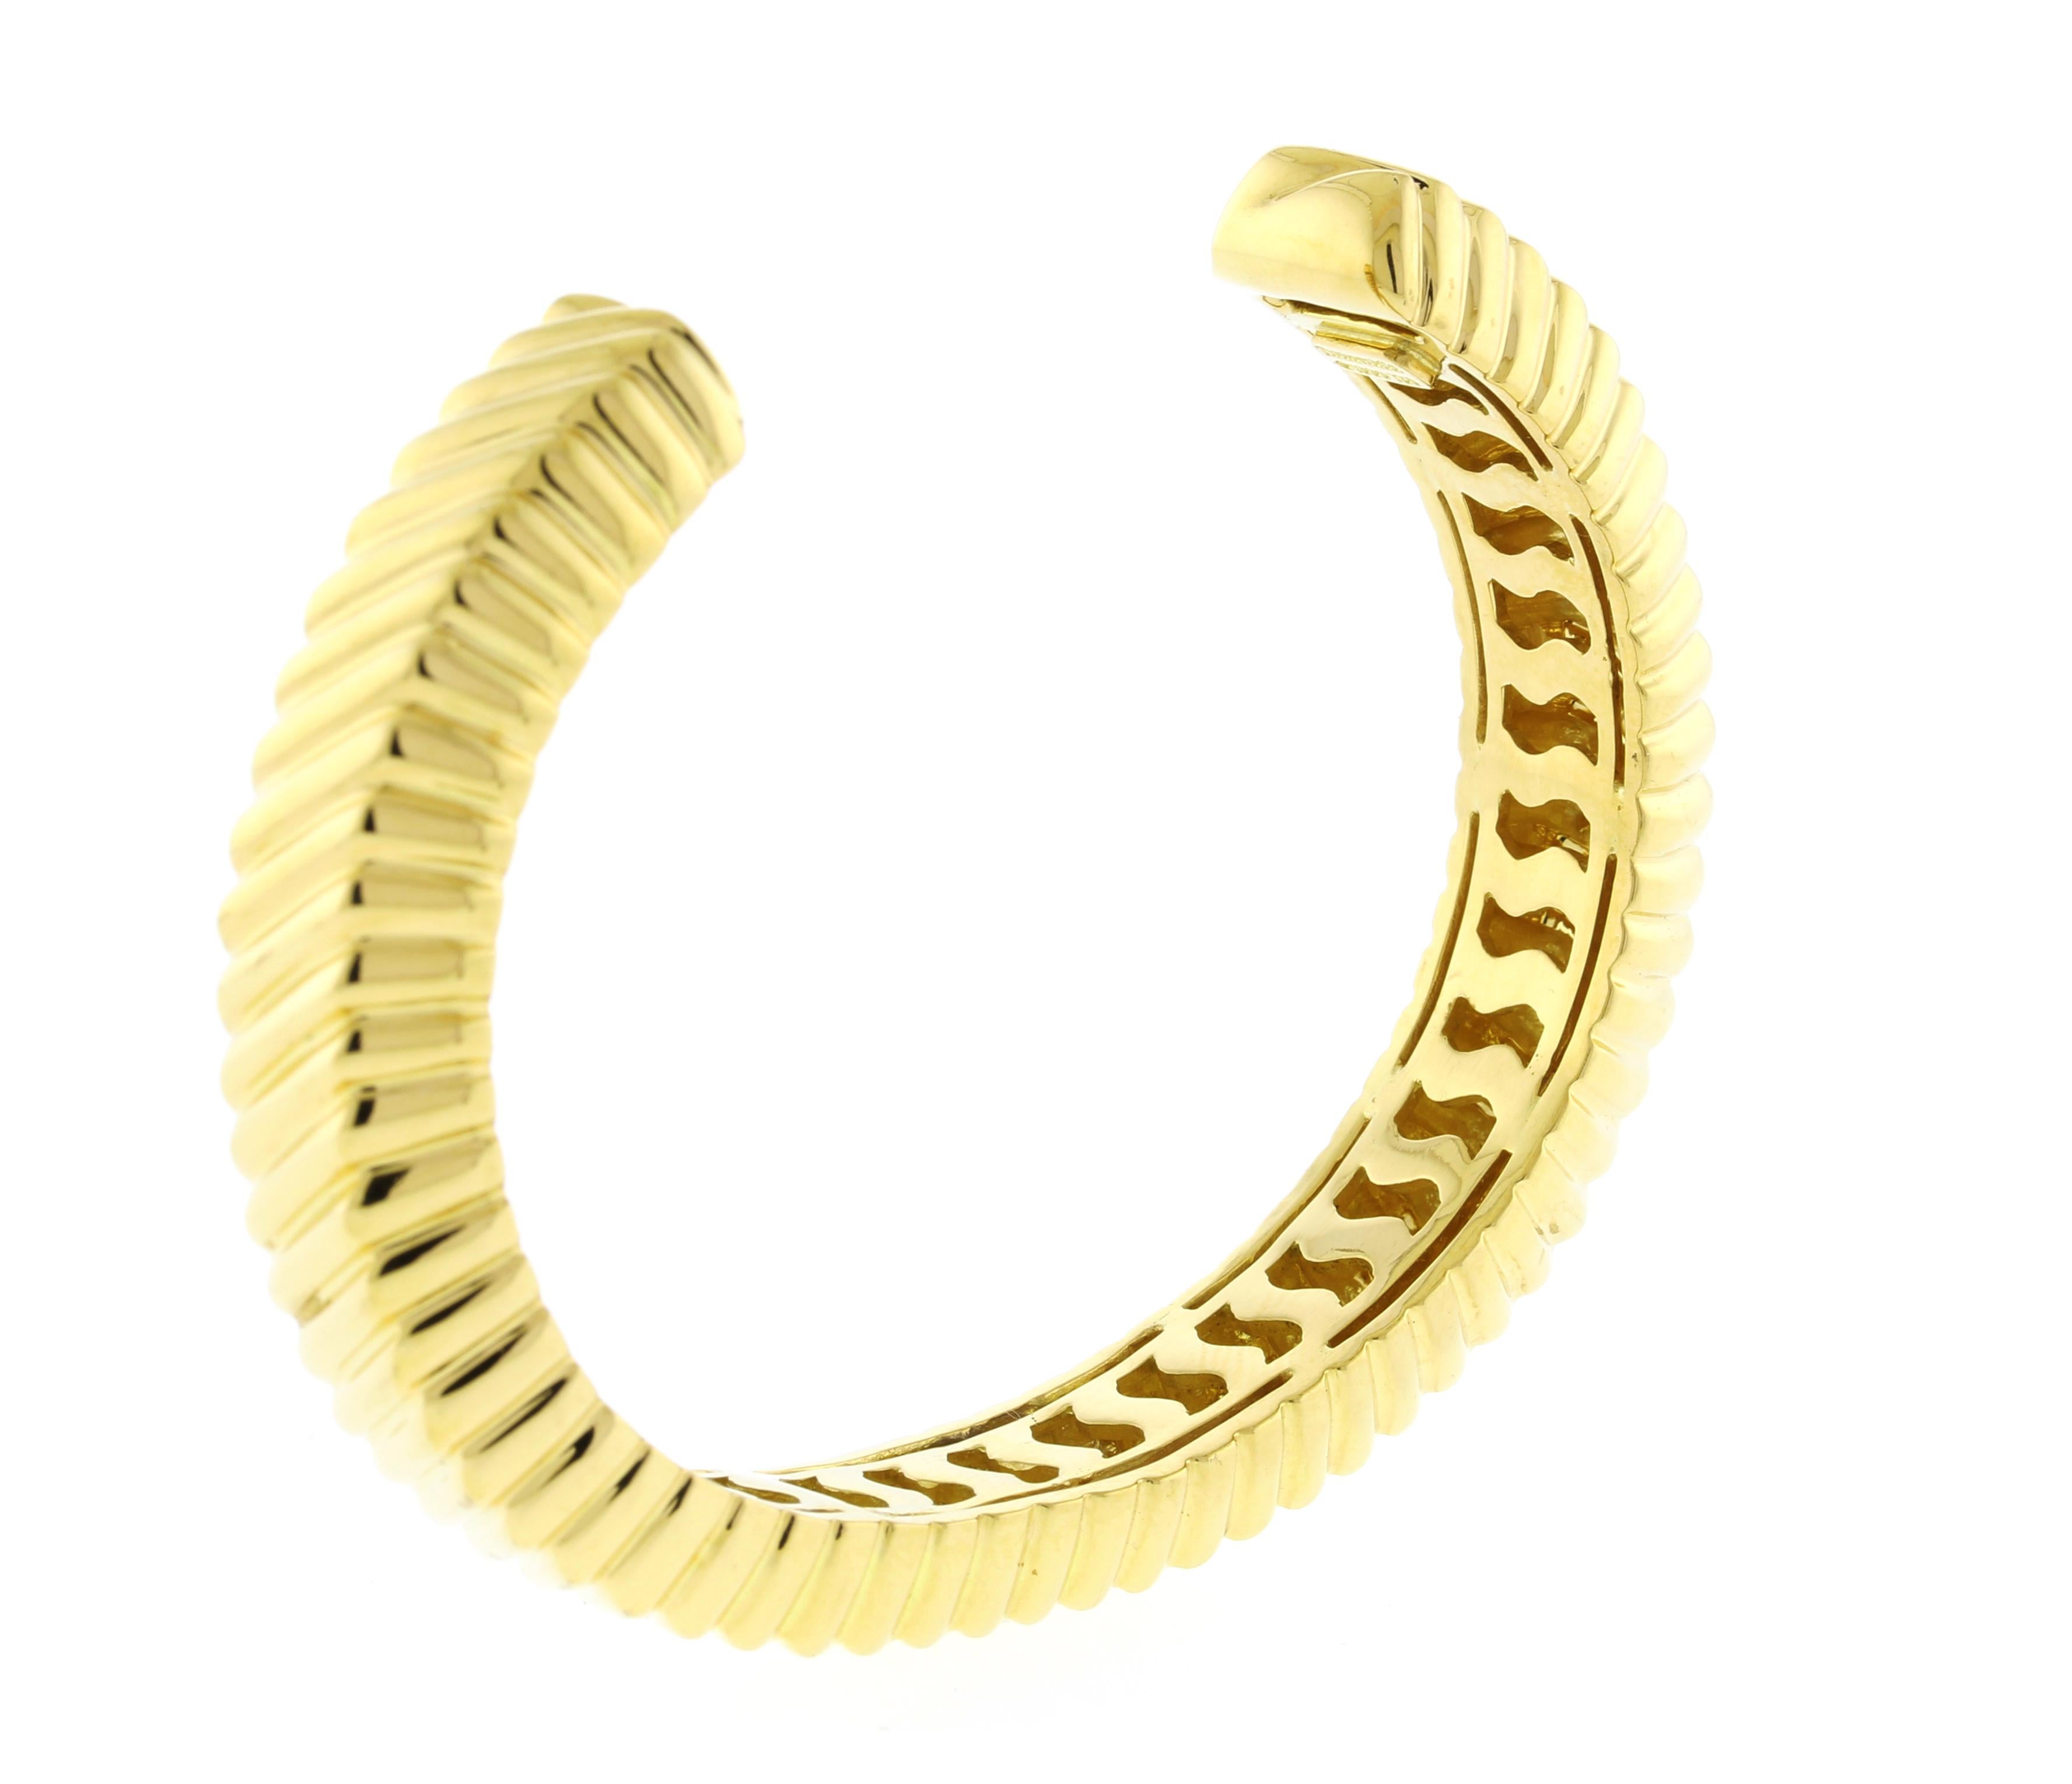 Tiffany & Co. 18K Yellow Gold Ribbed Cuff Bracelet In Excellent Condition For Sale In Bethesda, MD